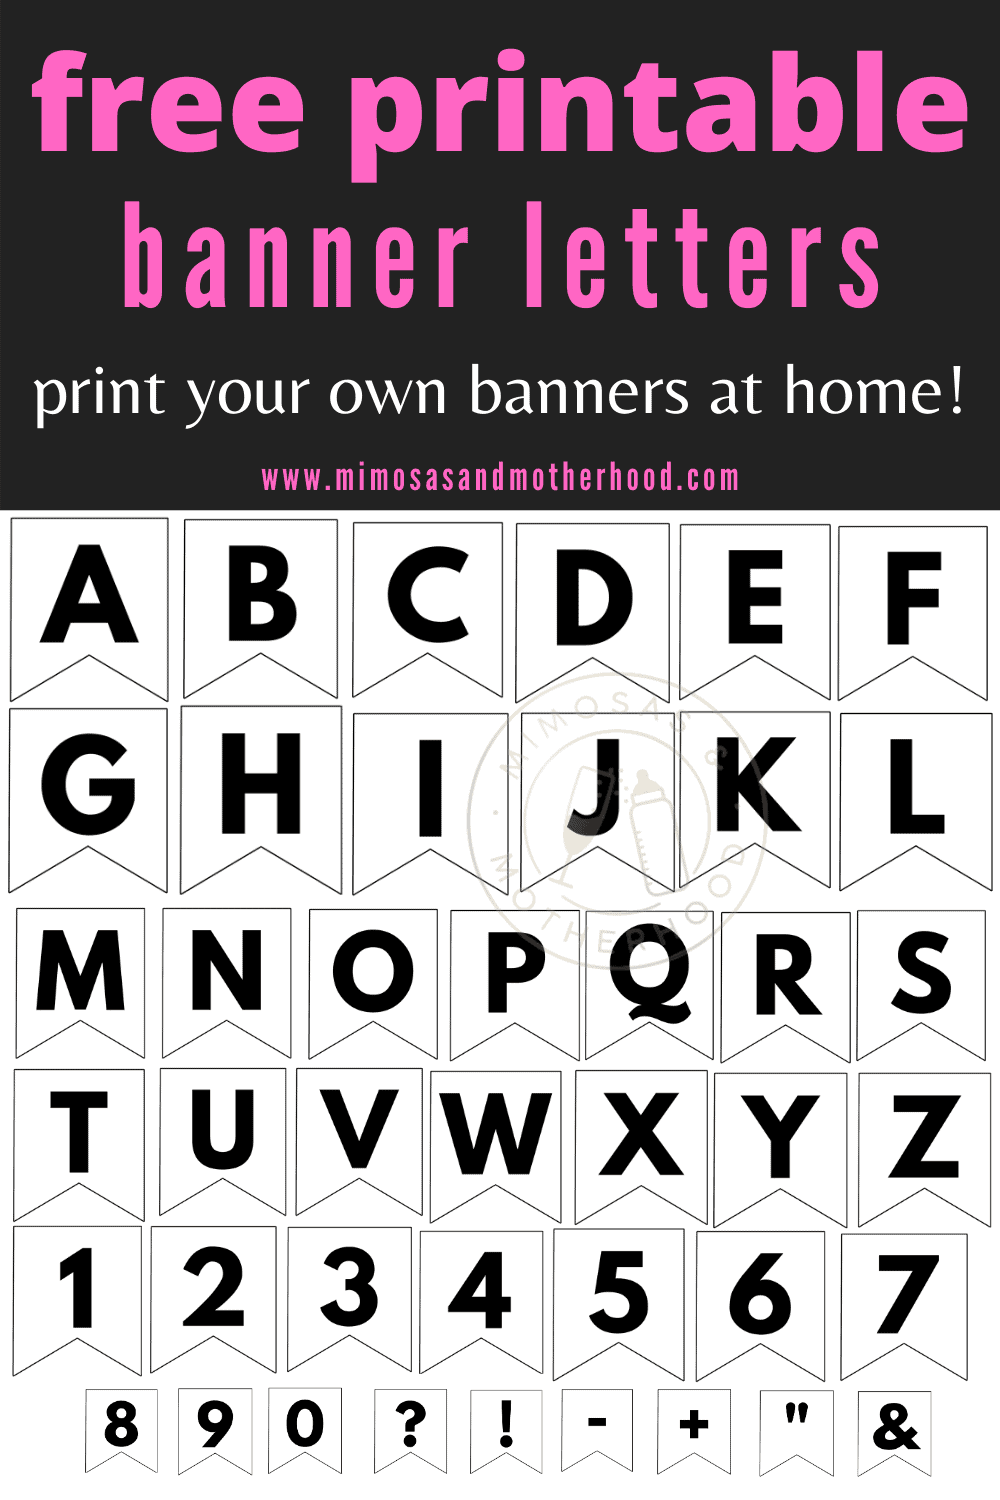 Free Printable ABC Banner Letters Template – Mimosas & Motherhood For Free Letter Templates For Banners